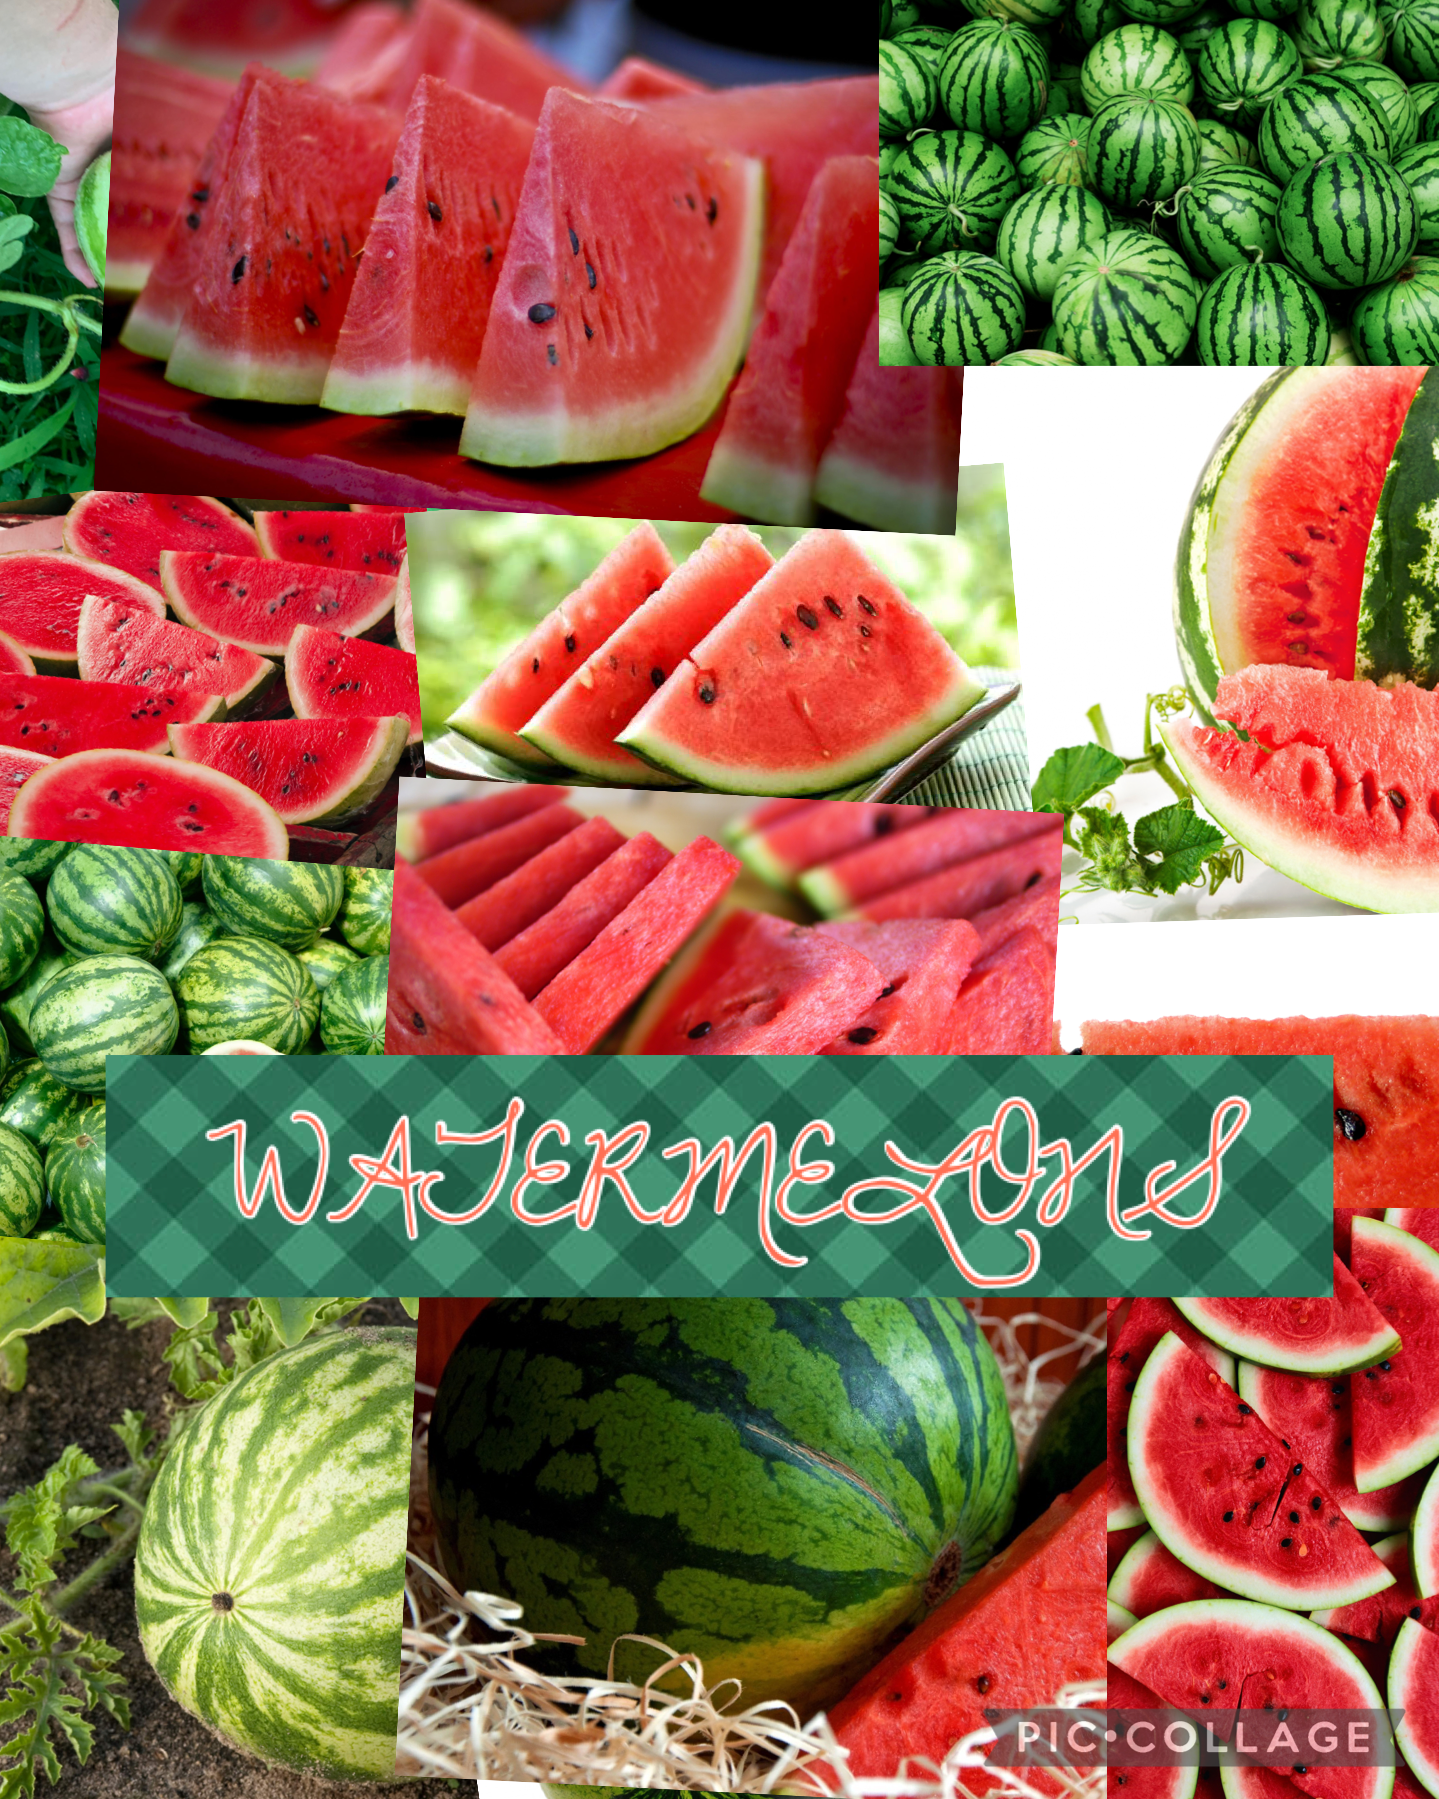 🍉tap🍉

here’s another collage dedicated to my my watermelon crave!! 🍉🍉🍉